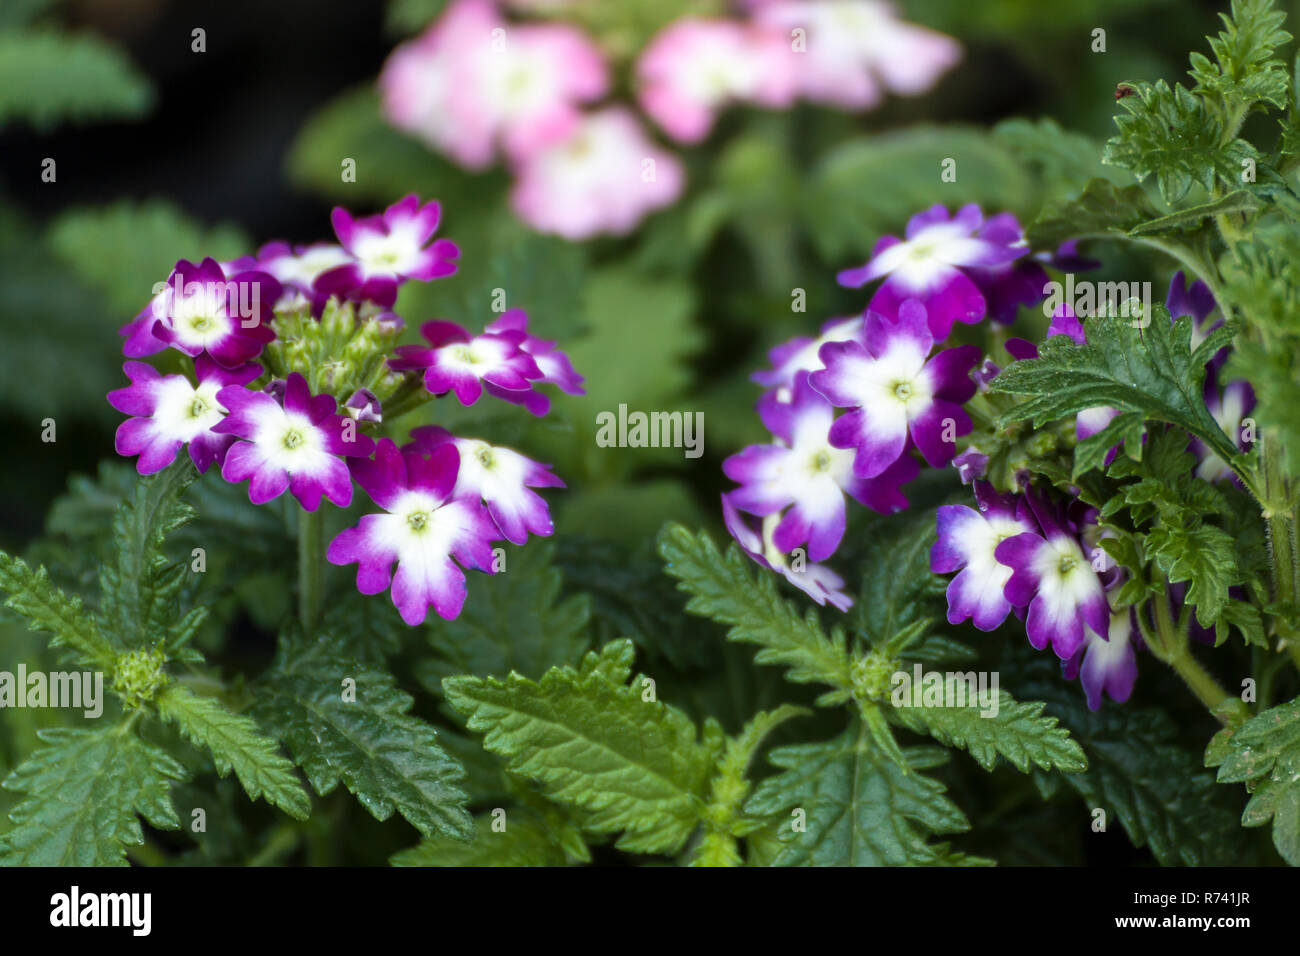 Violet verbena flower with green leaves Stock Photo